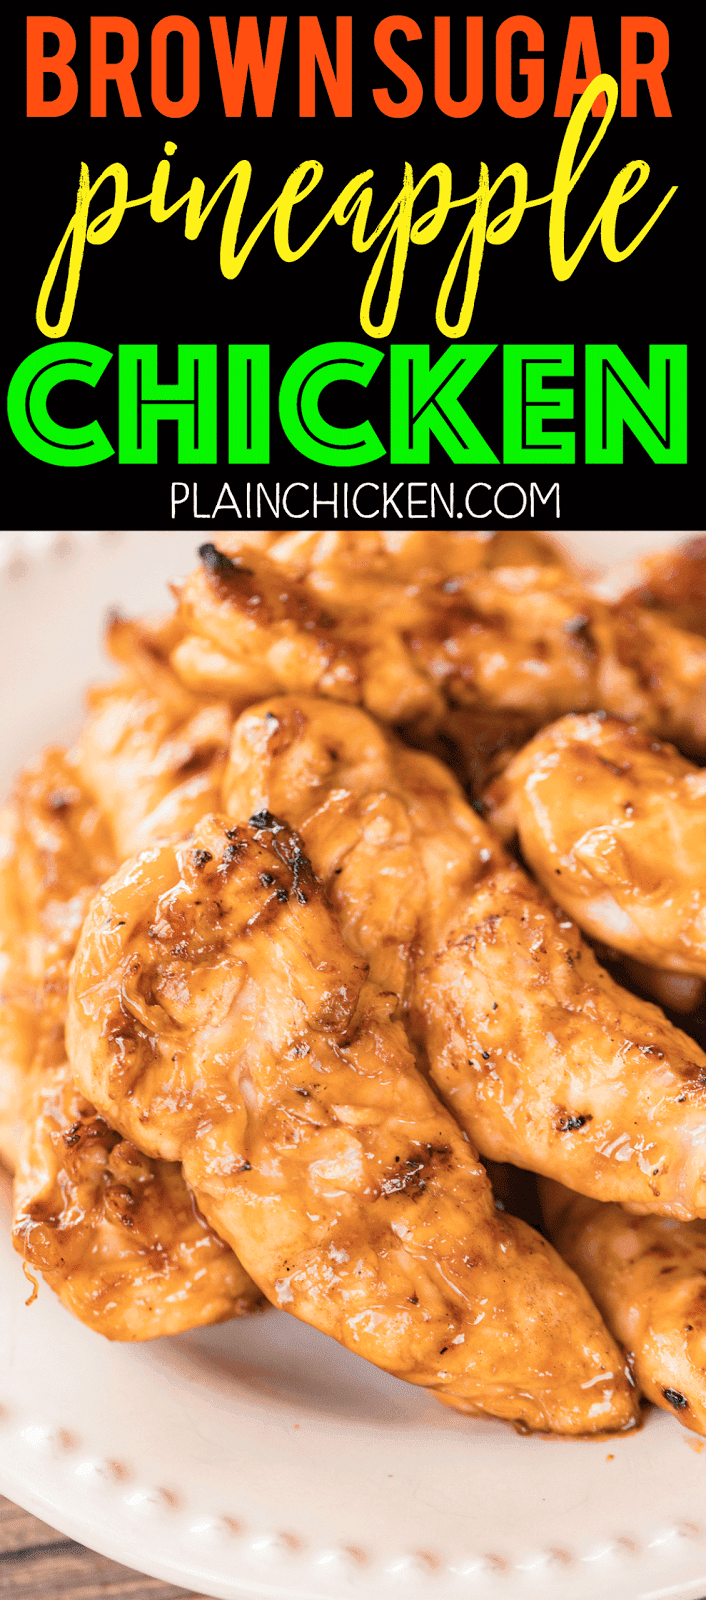 Brown Sugar Pineapple Chicken - only 4 ingredients! SO good!!! We actually made it twice in one week. Pineapple juice, brown sugar, BBQ sauce and chicken. Such an easy weeknight meal.